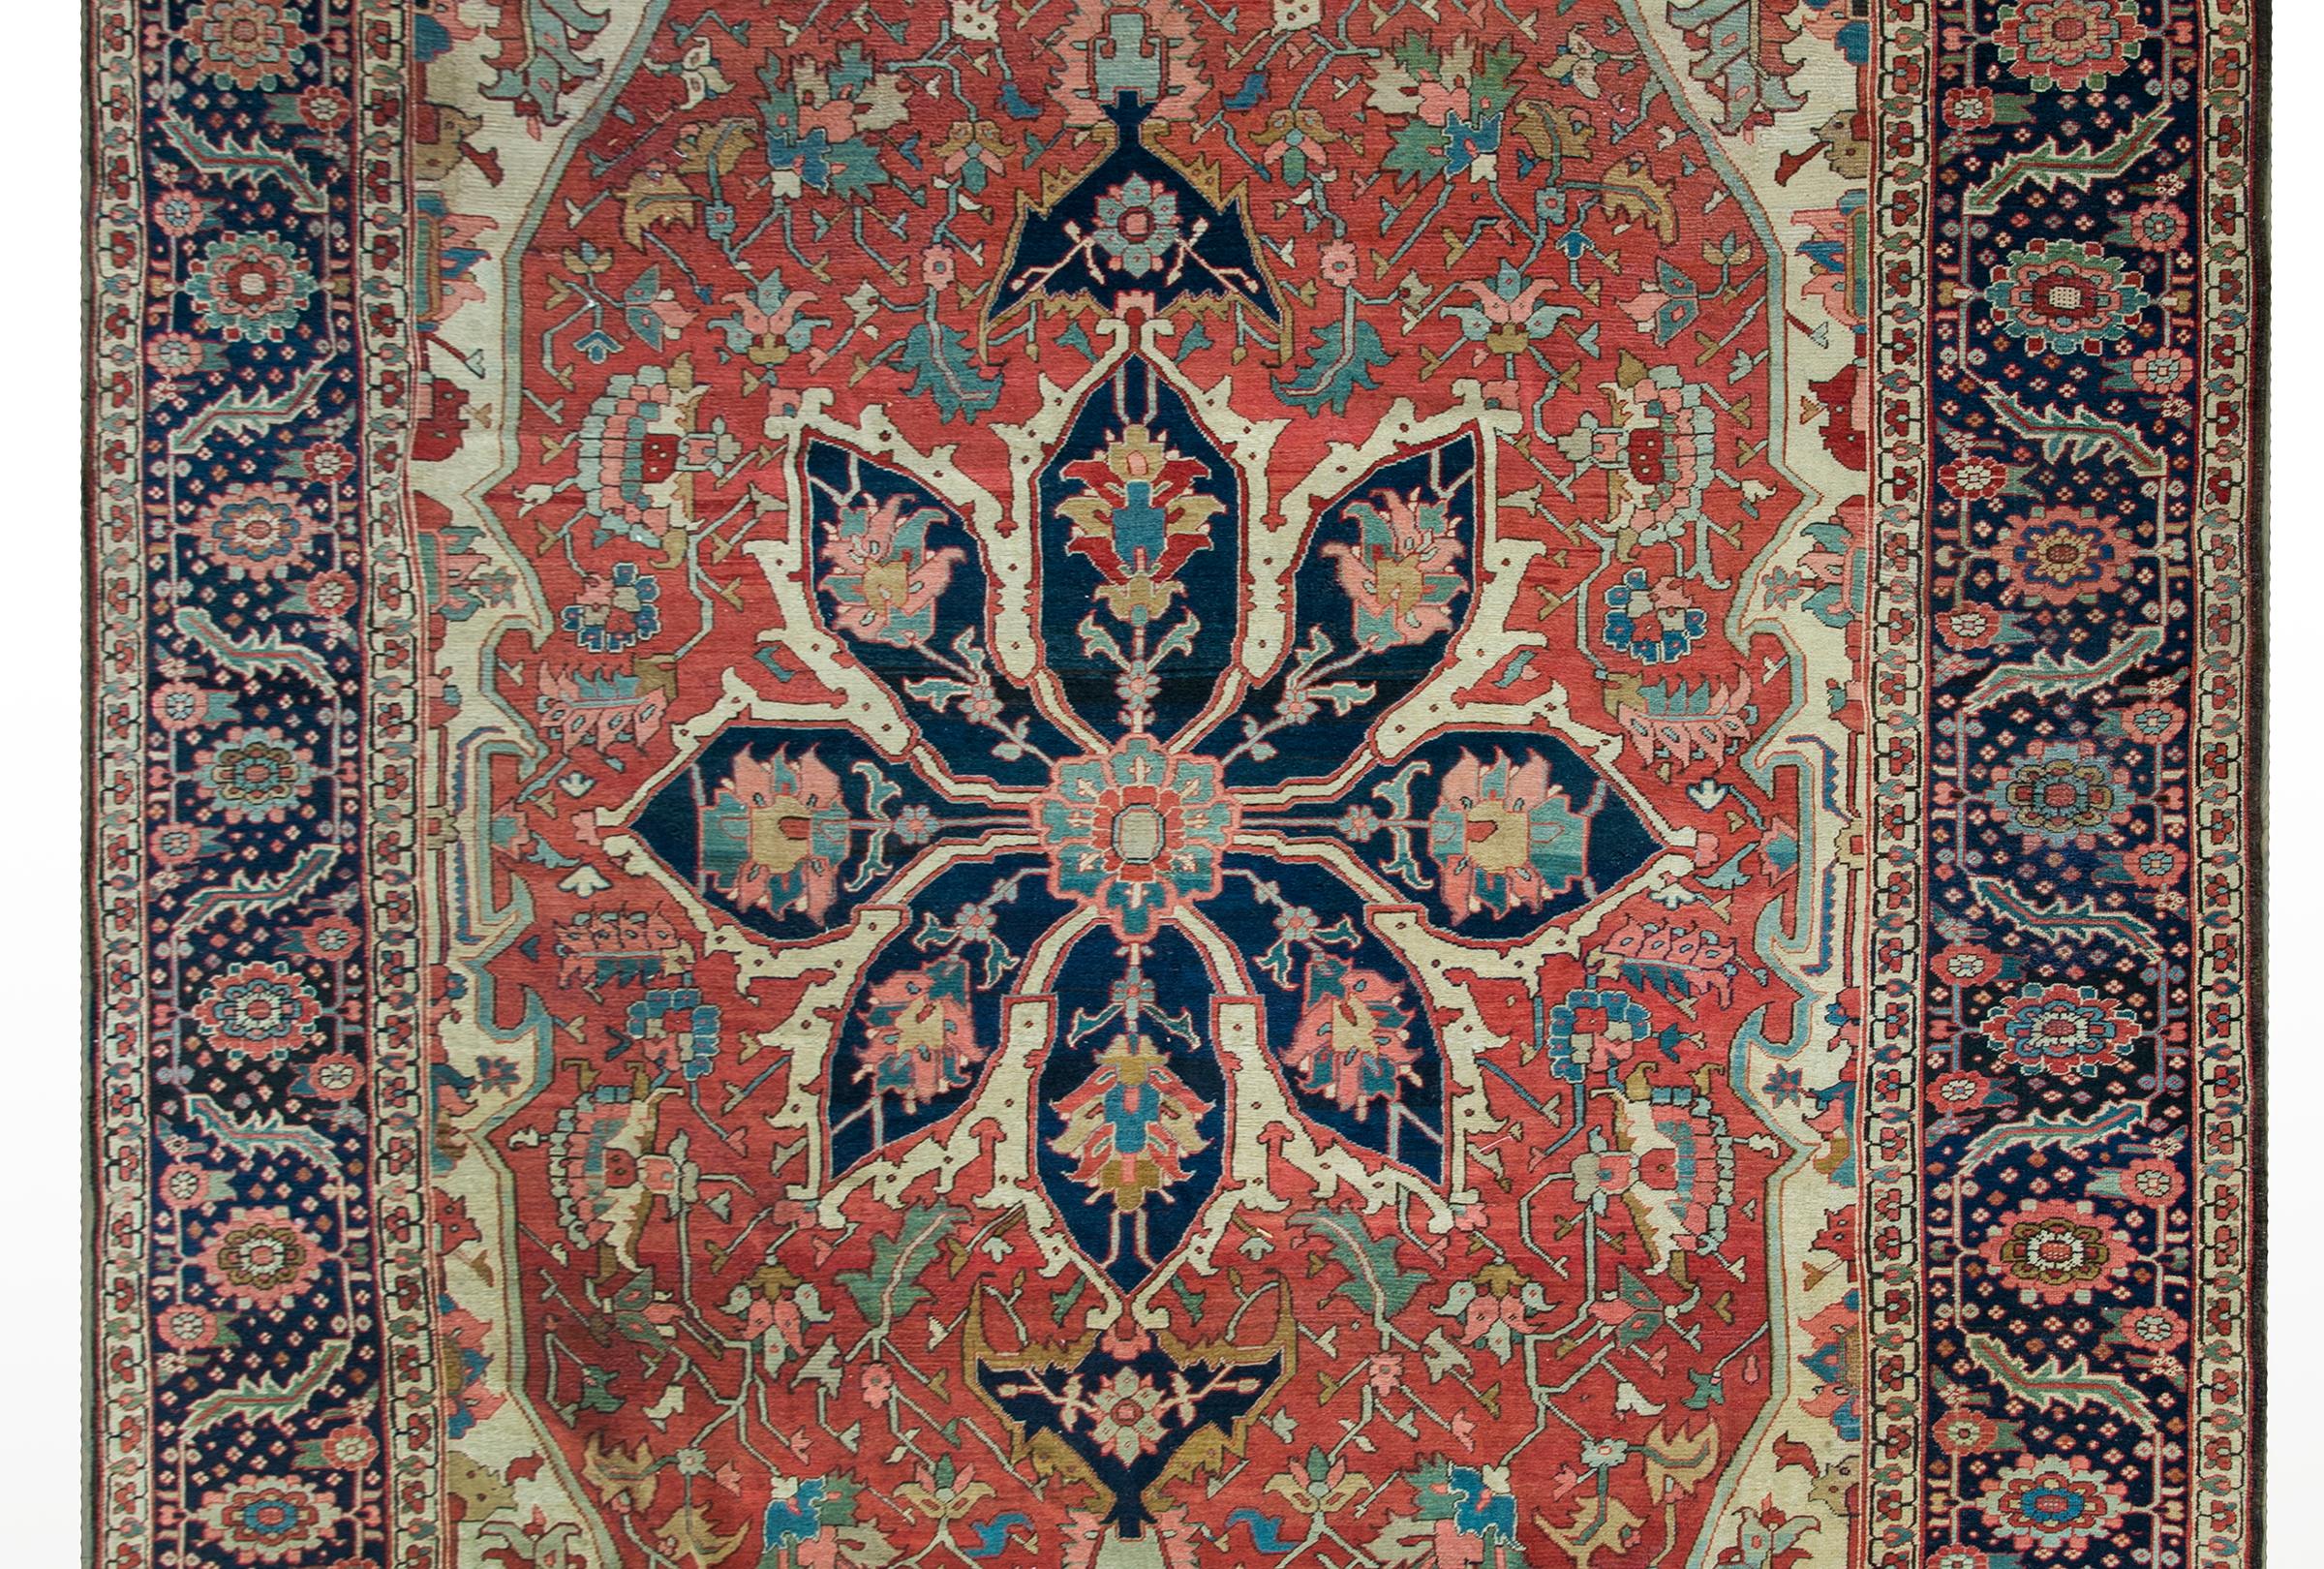 A magical and mesmerizing late 19th century Persian Serapi rug with the most beautiful central floral medallion with large-scale flowers and leaves woven in abrash indigos, pinks, crimsons, creams, and golds, and set against a field of more flowers